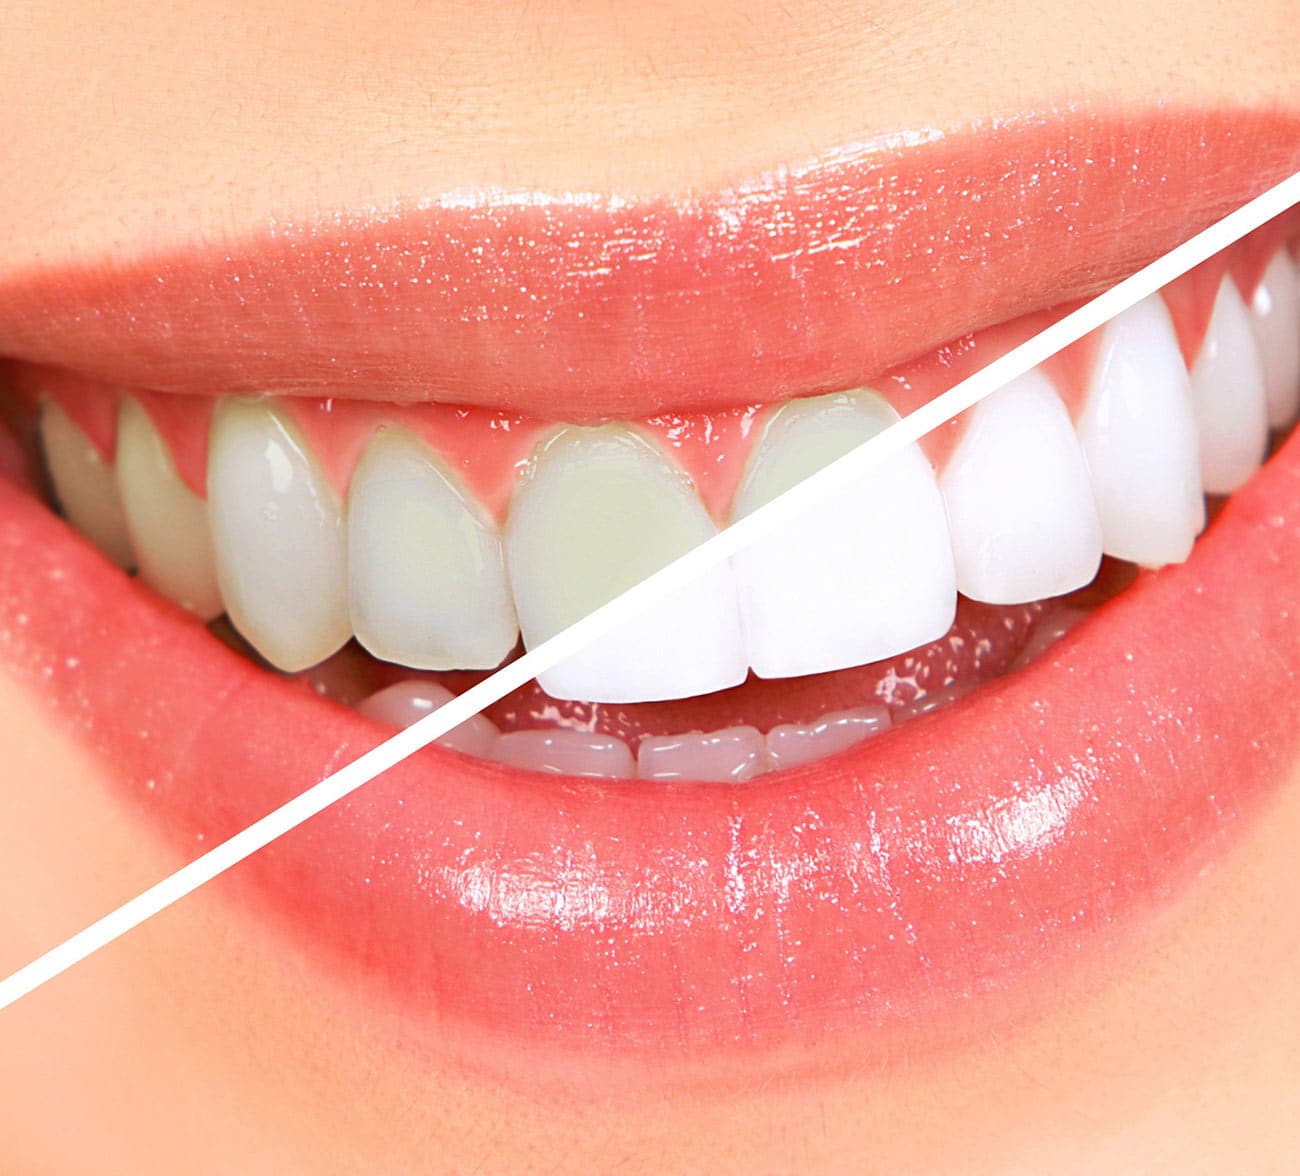 Dentus perfectus - teeth whitening before and after